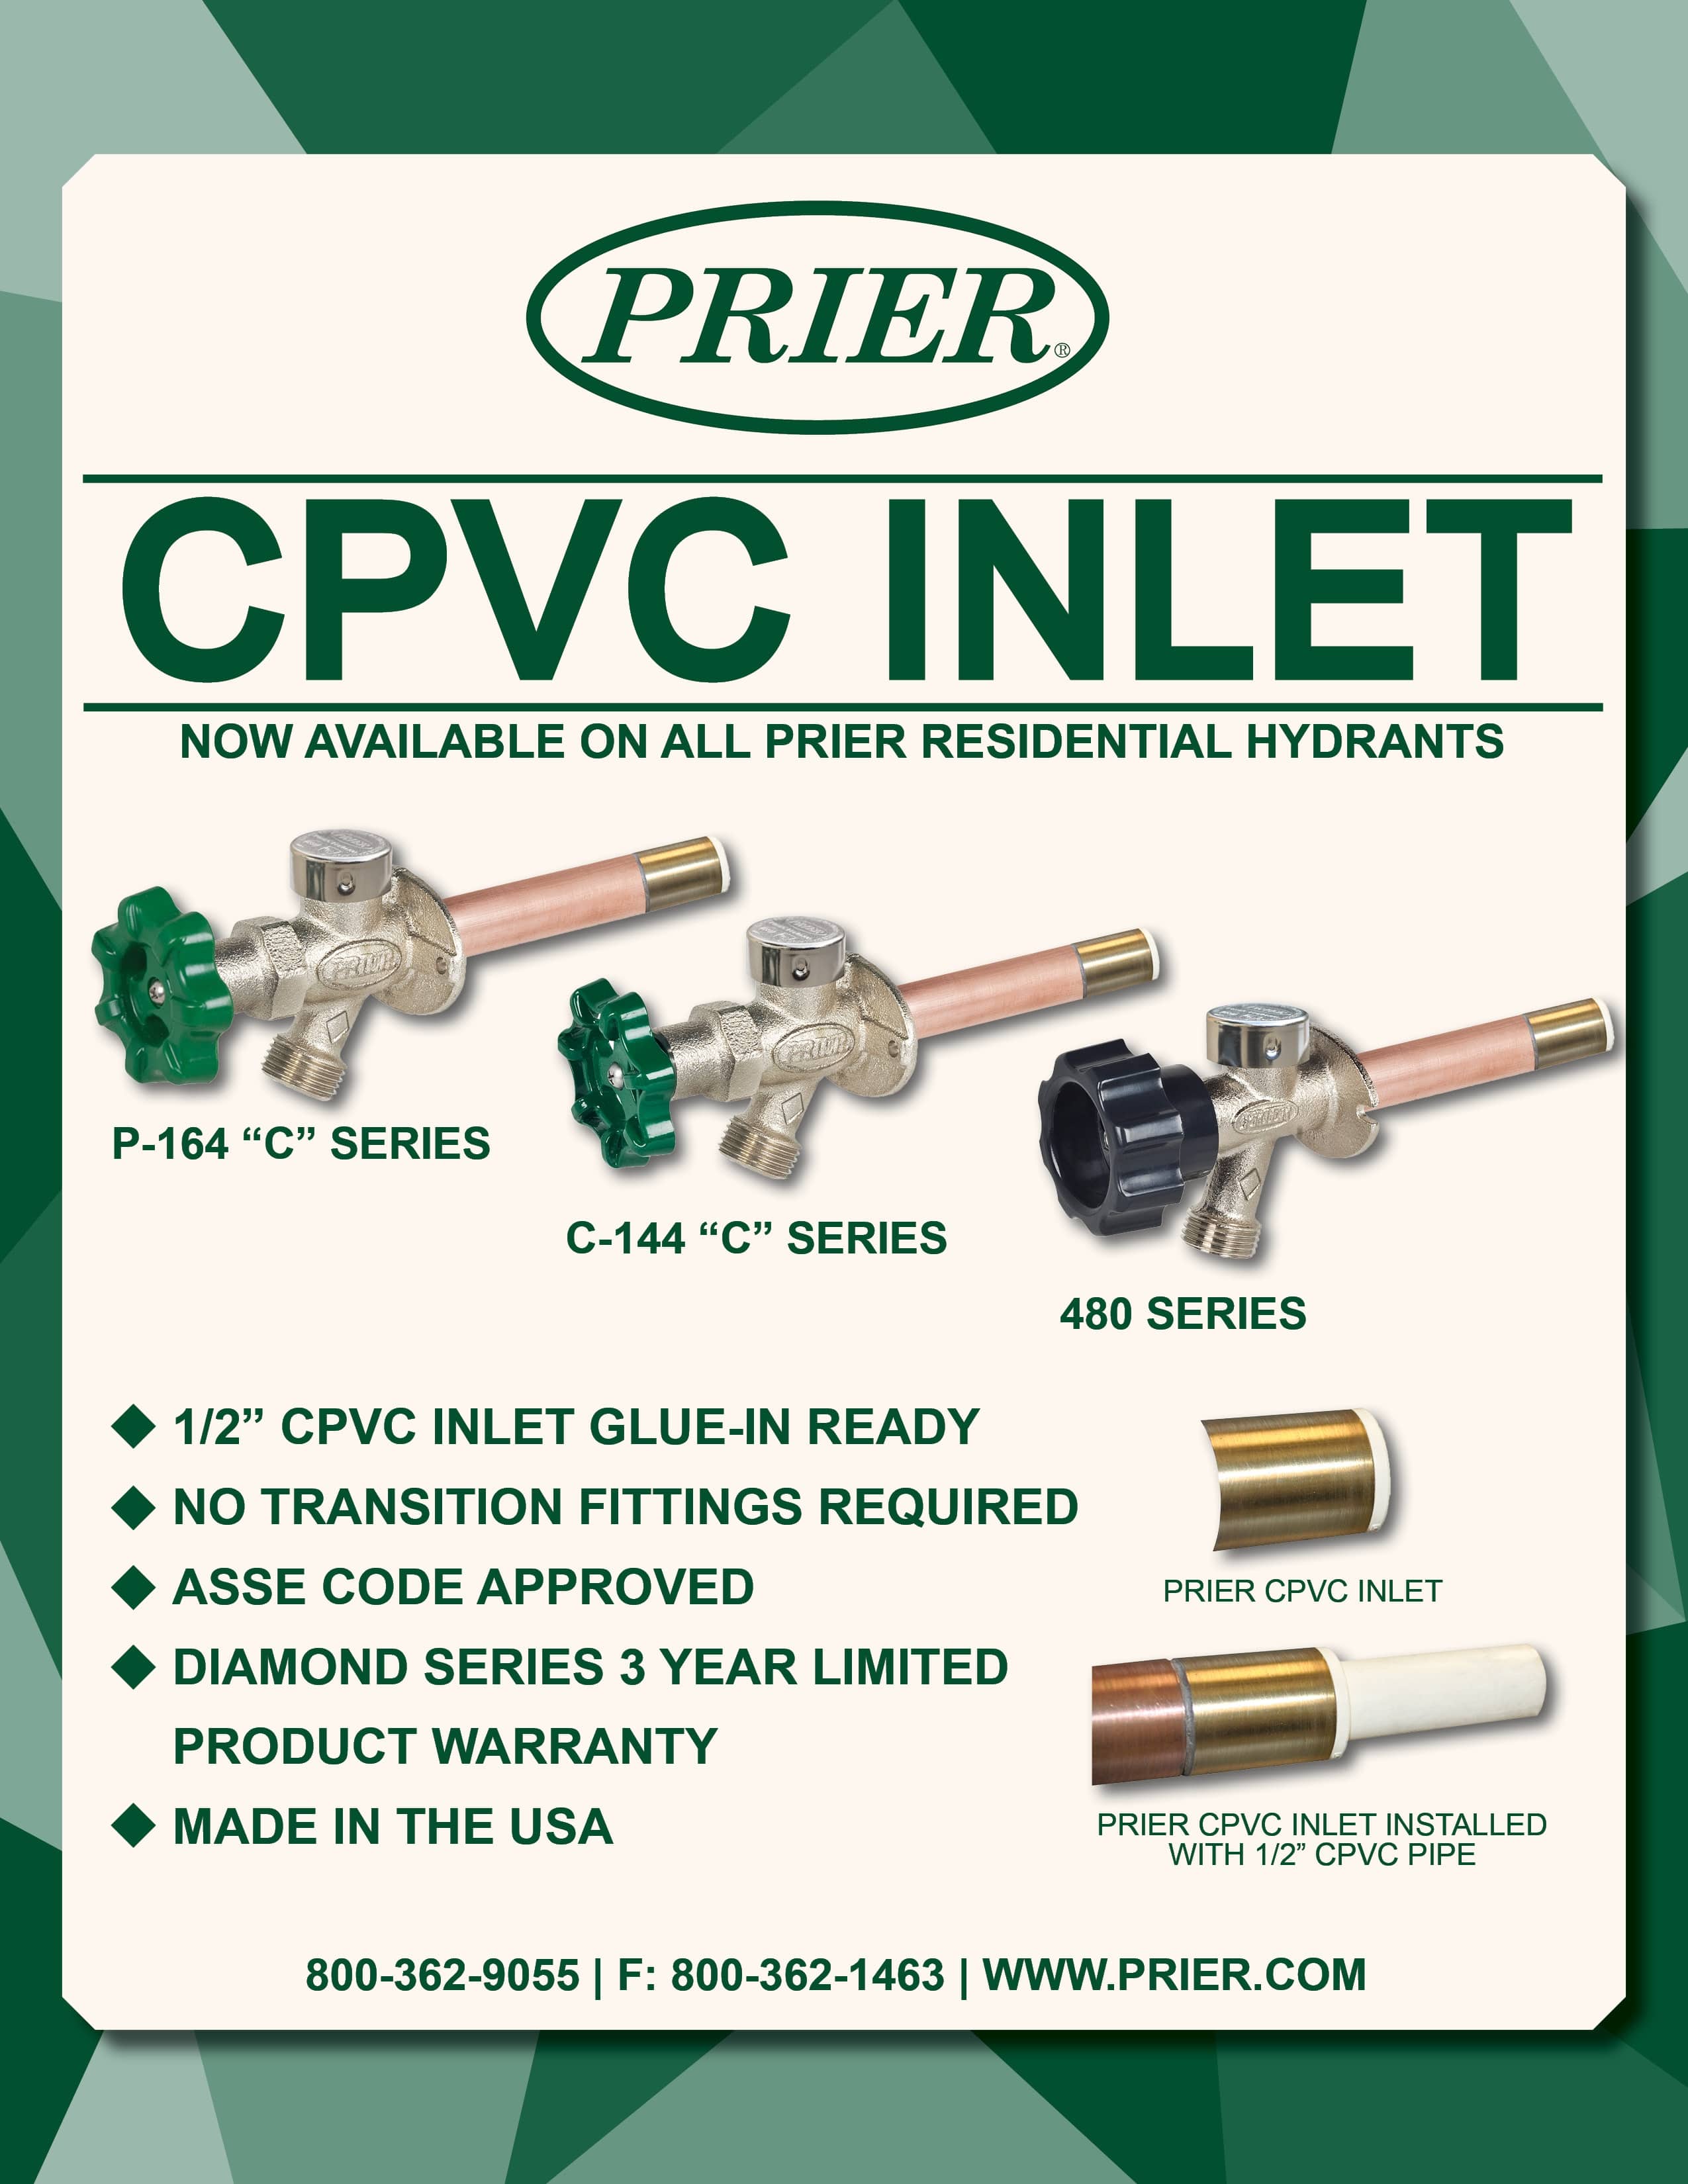 PRIER Introduces New CPVC Inlet